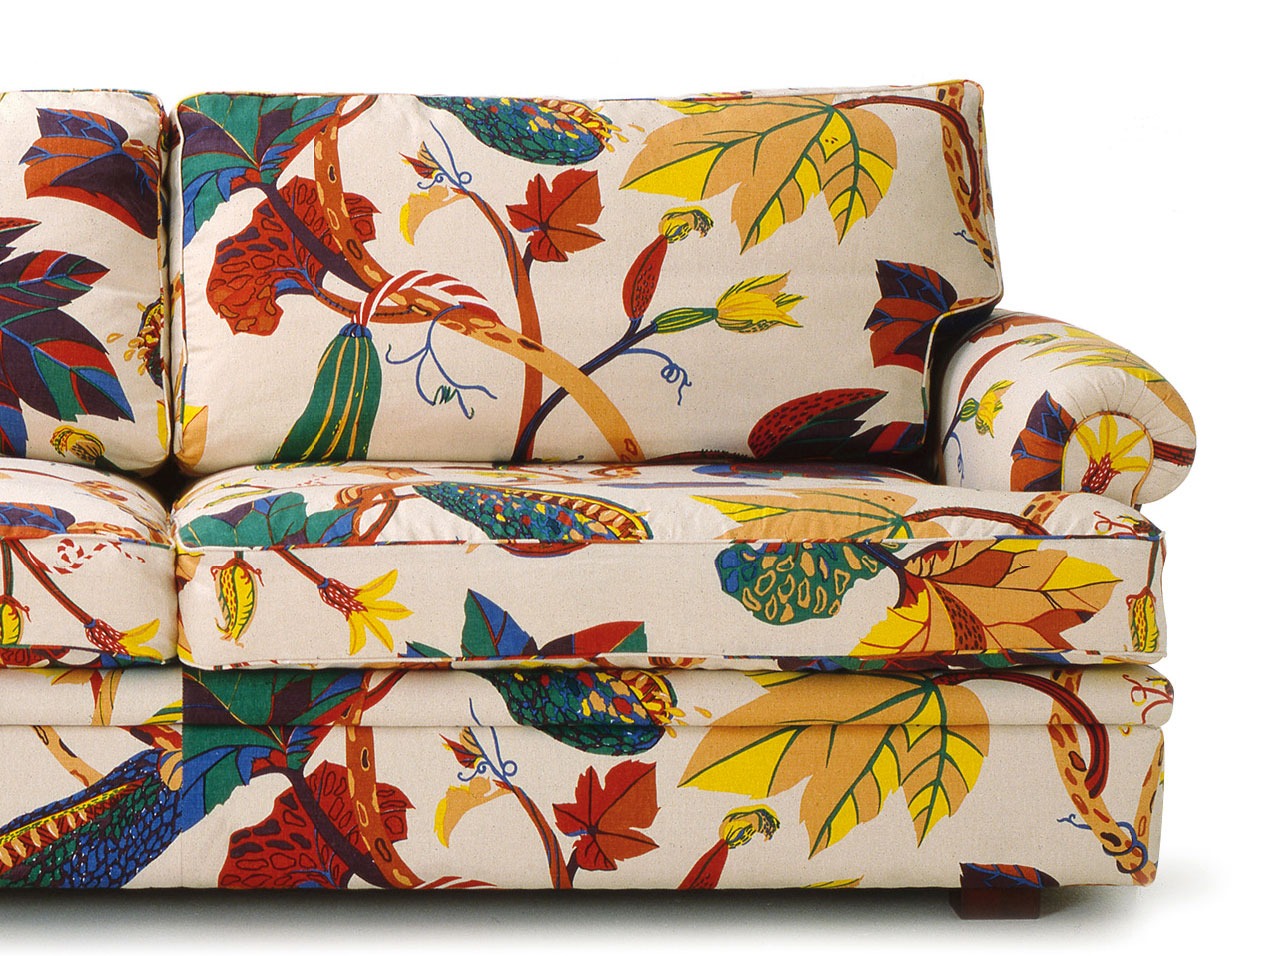 Sofa with bold multi-coloured floral pattern.